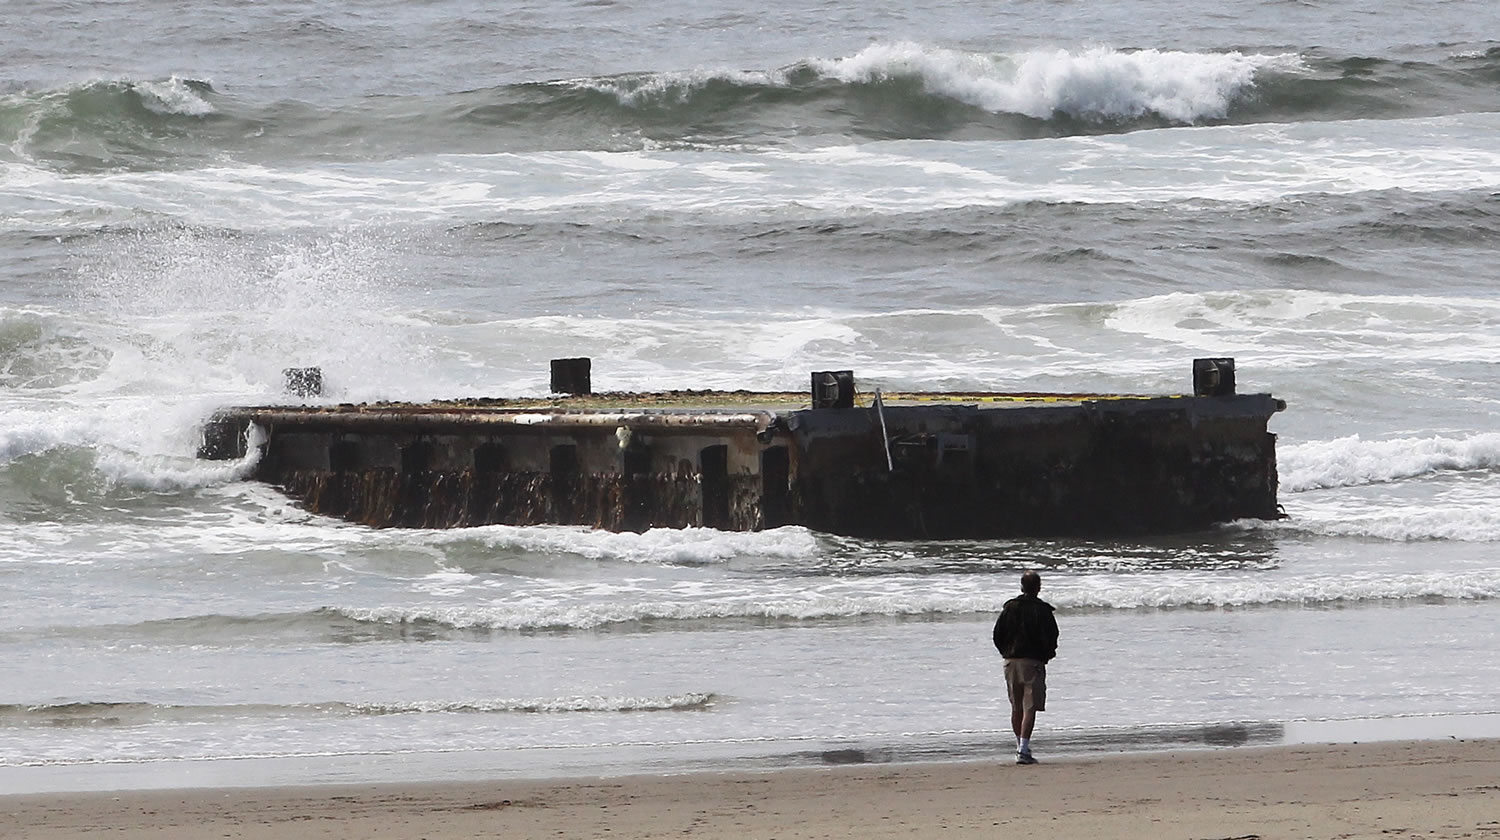 Associated Press files
A man looks at the tsunami dock that washed ashore on Agate Beach in Newport, Ore., in June. Another dock has washed ashore in Washington.